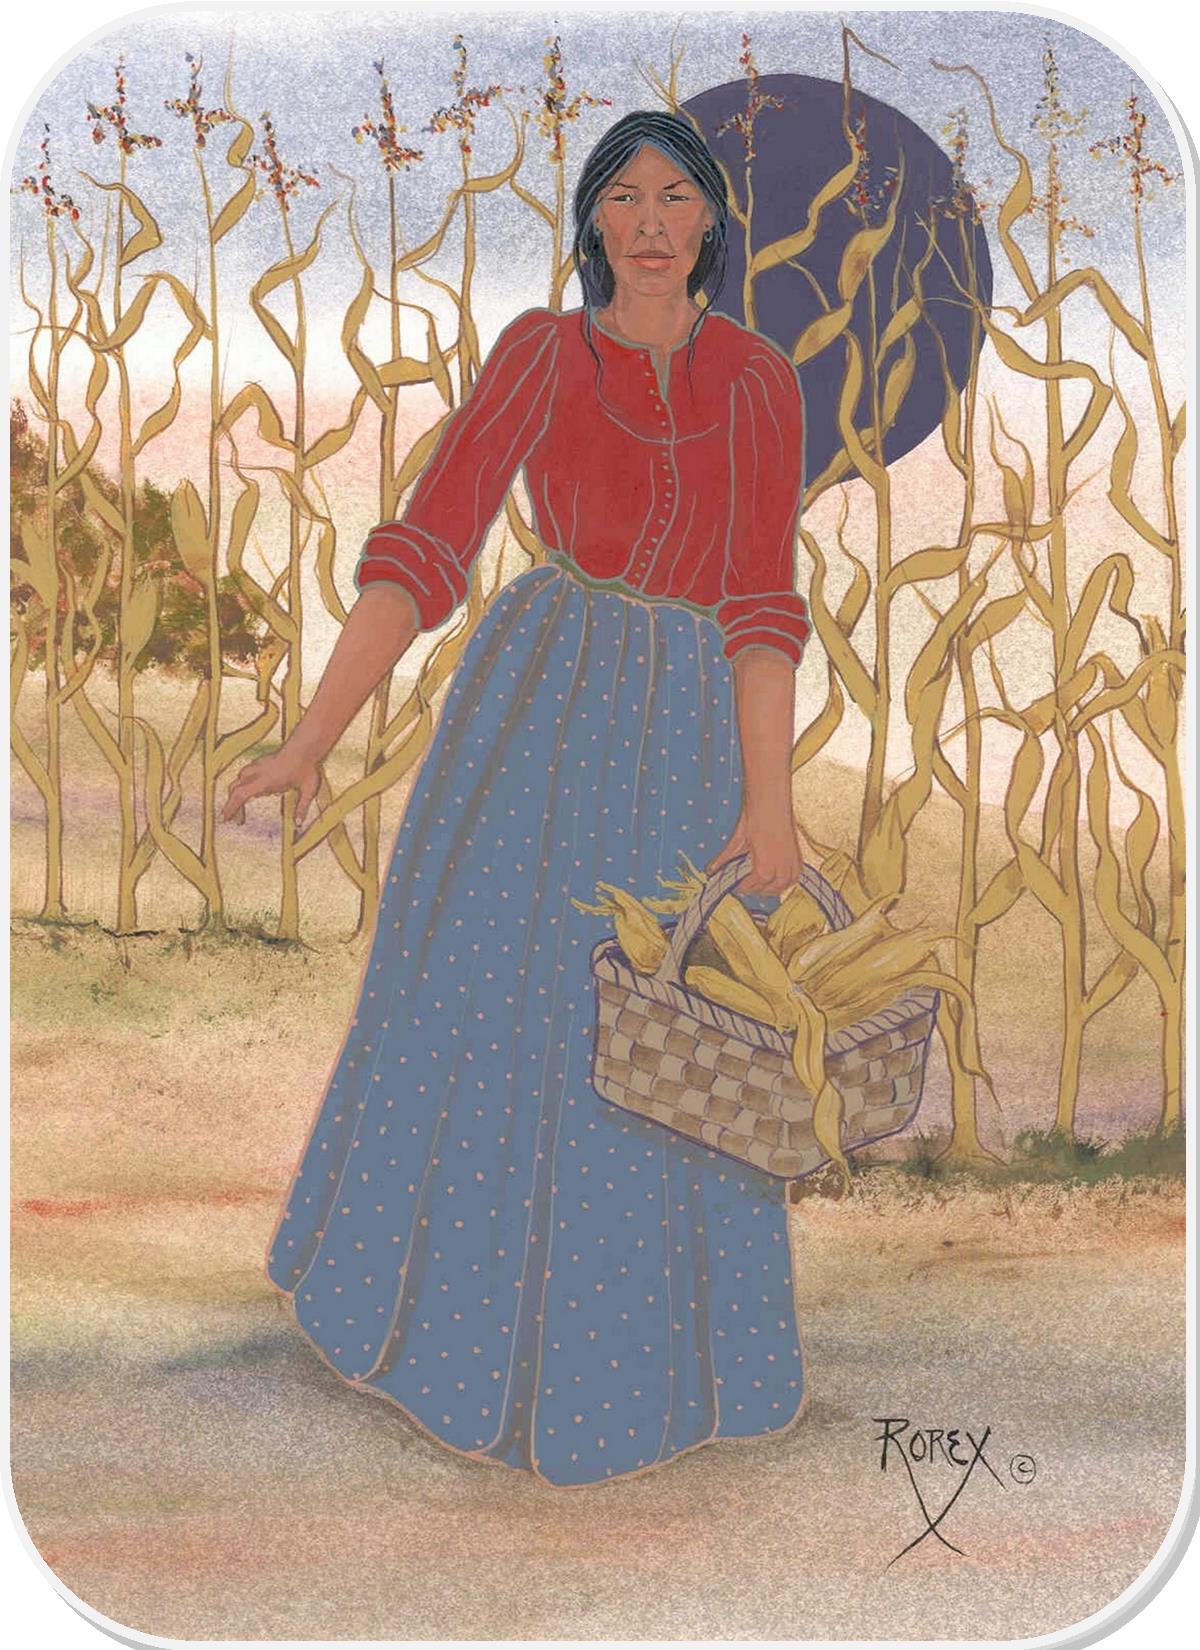 WOMAN WITH BASKET OF CORN